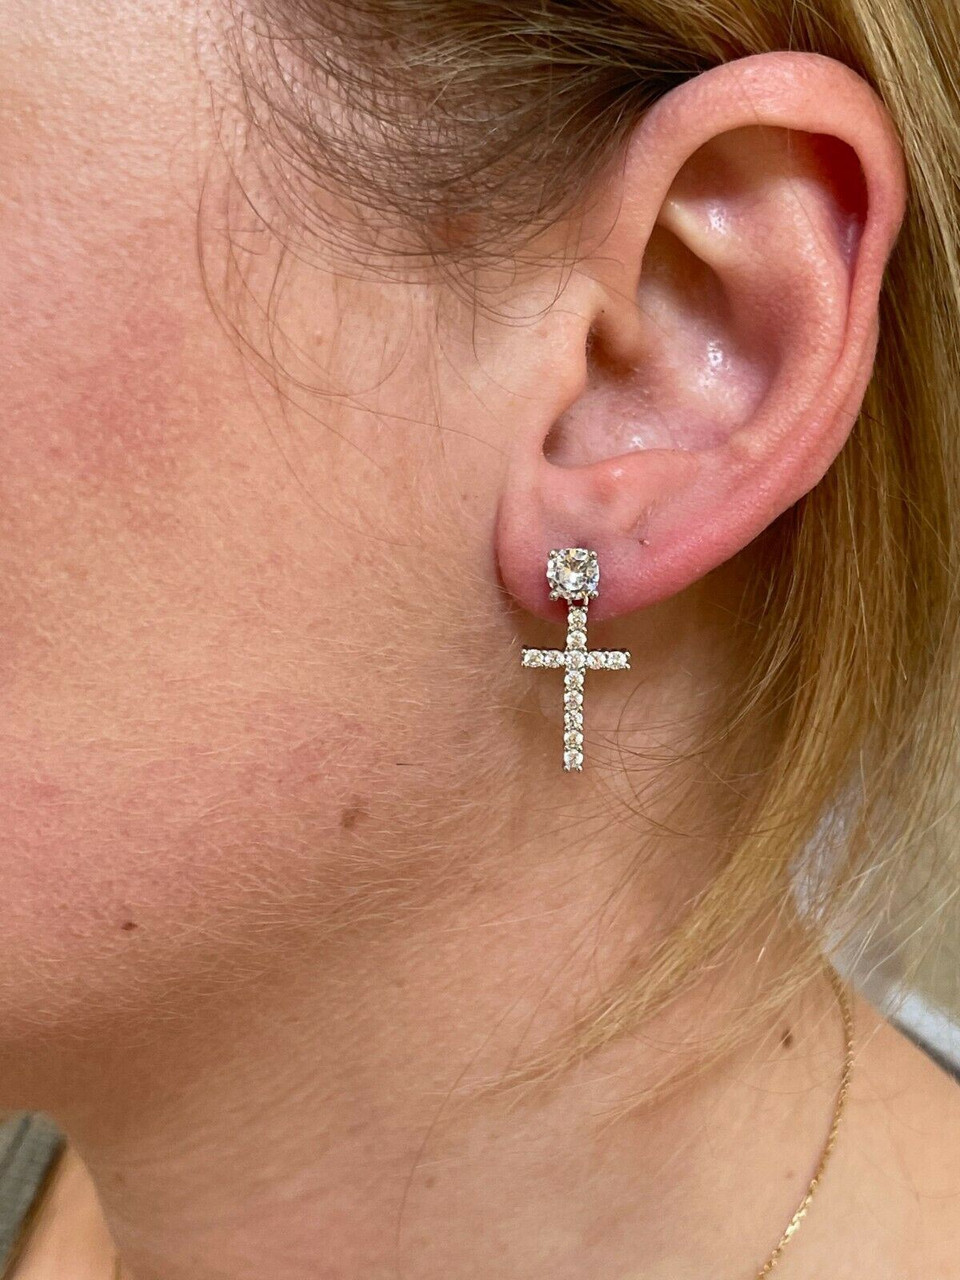 Mens Gold Stainless Steel Cross Earrings With Cubic Zirconia